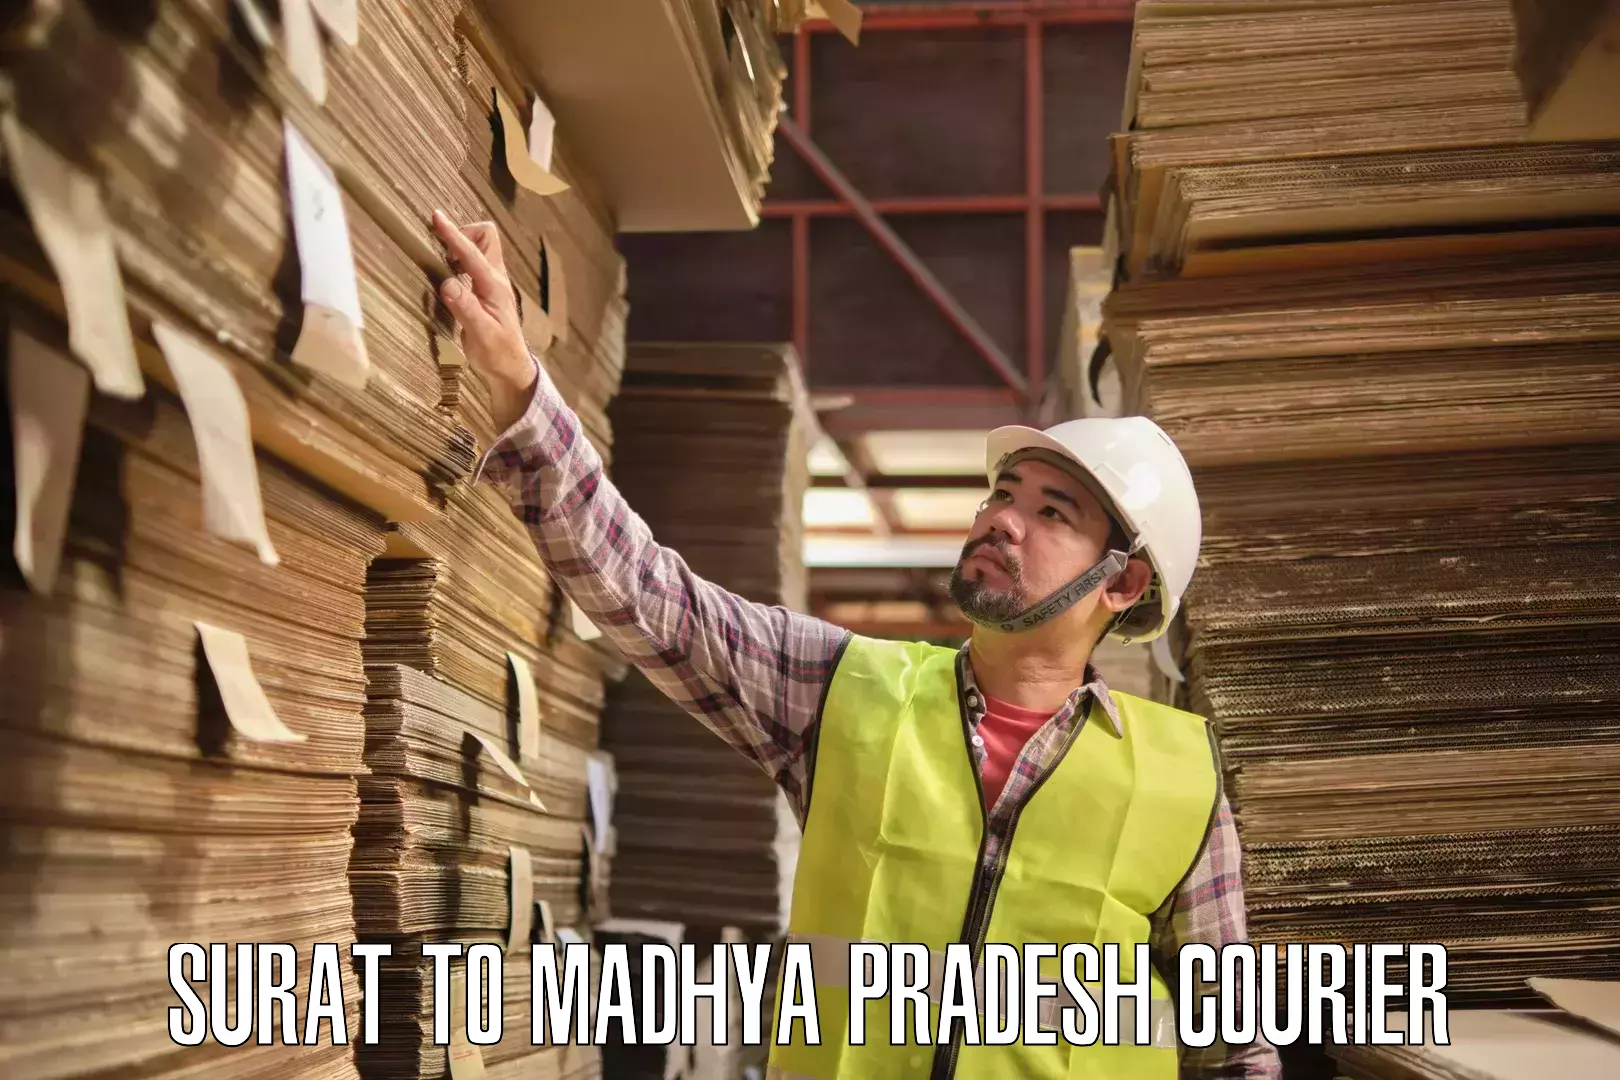 Reliable delivery network Surat to Madhya Pradesh